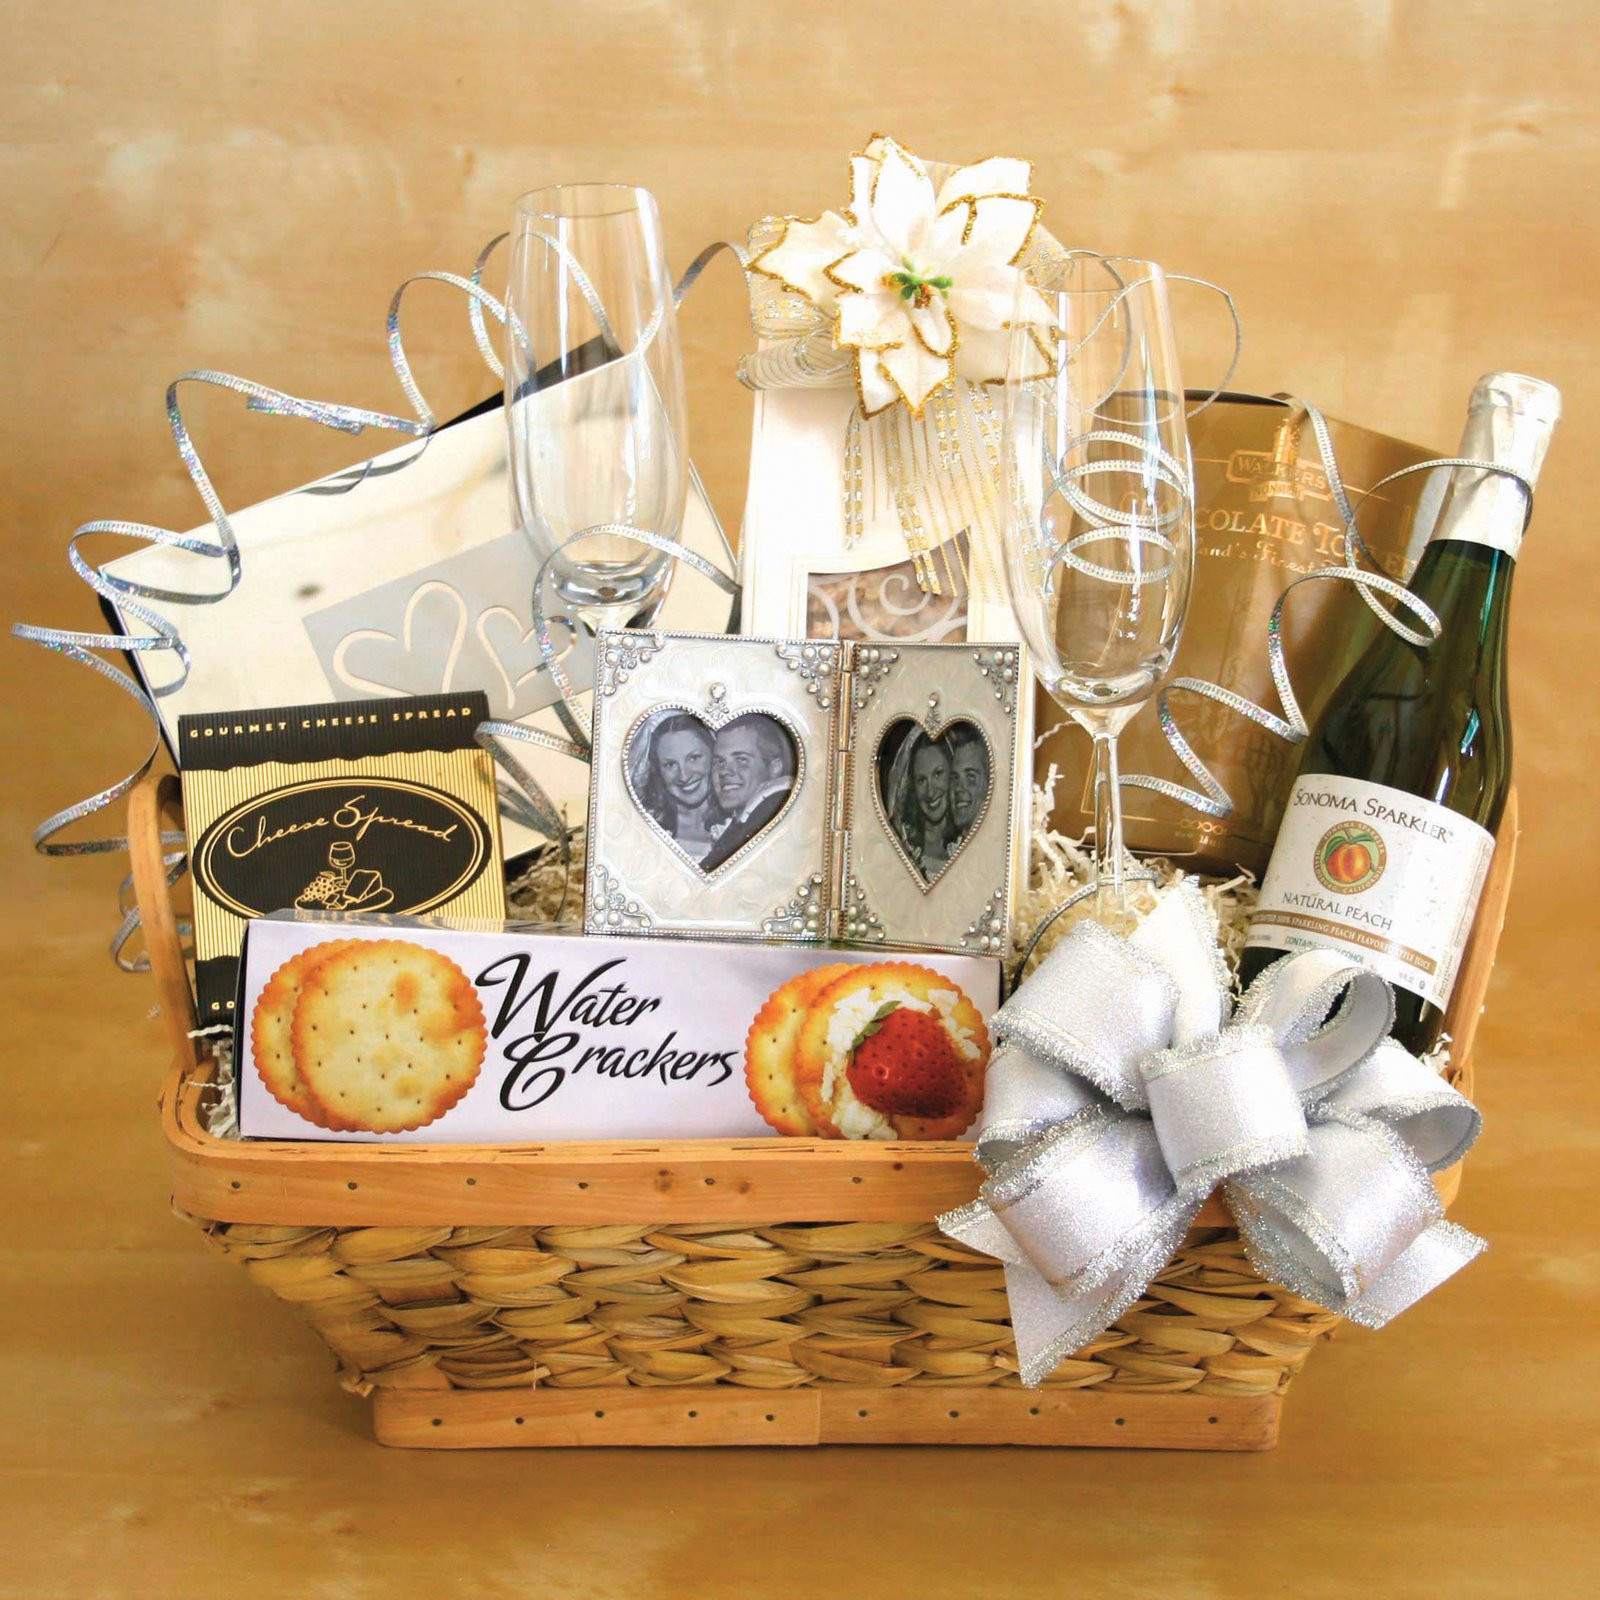 Ideas For A Wedding Gift
 Simple Wedding Gifts